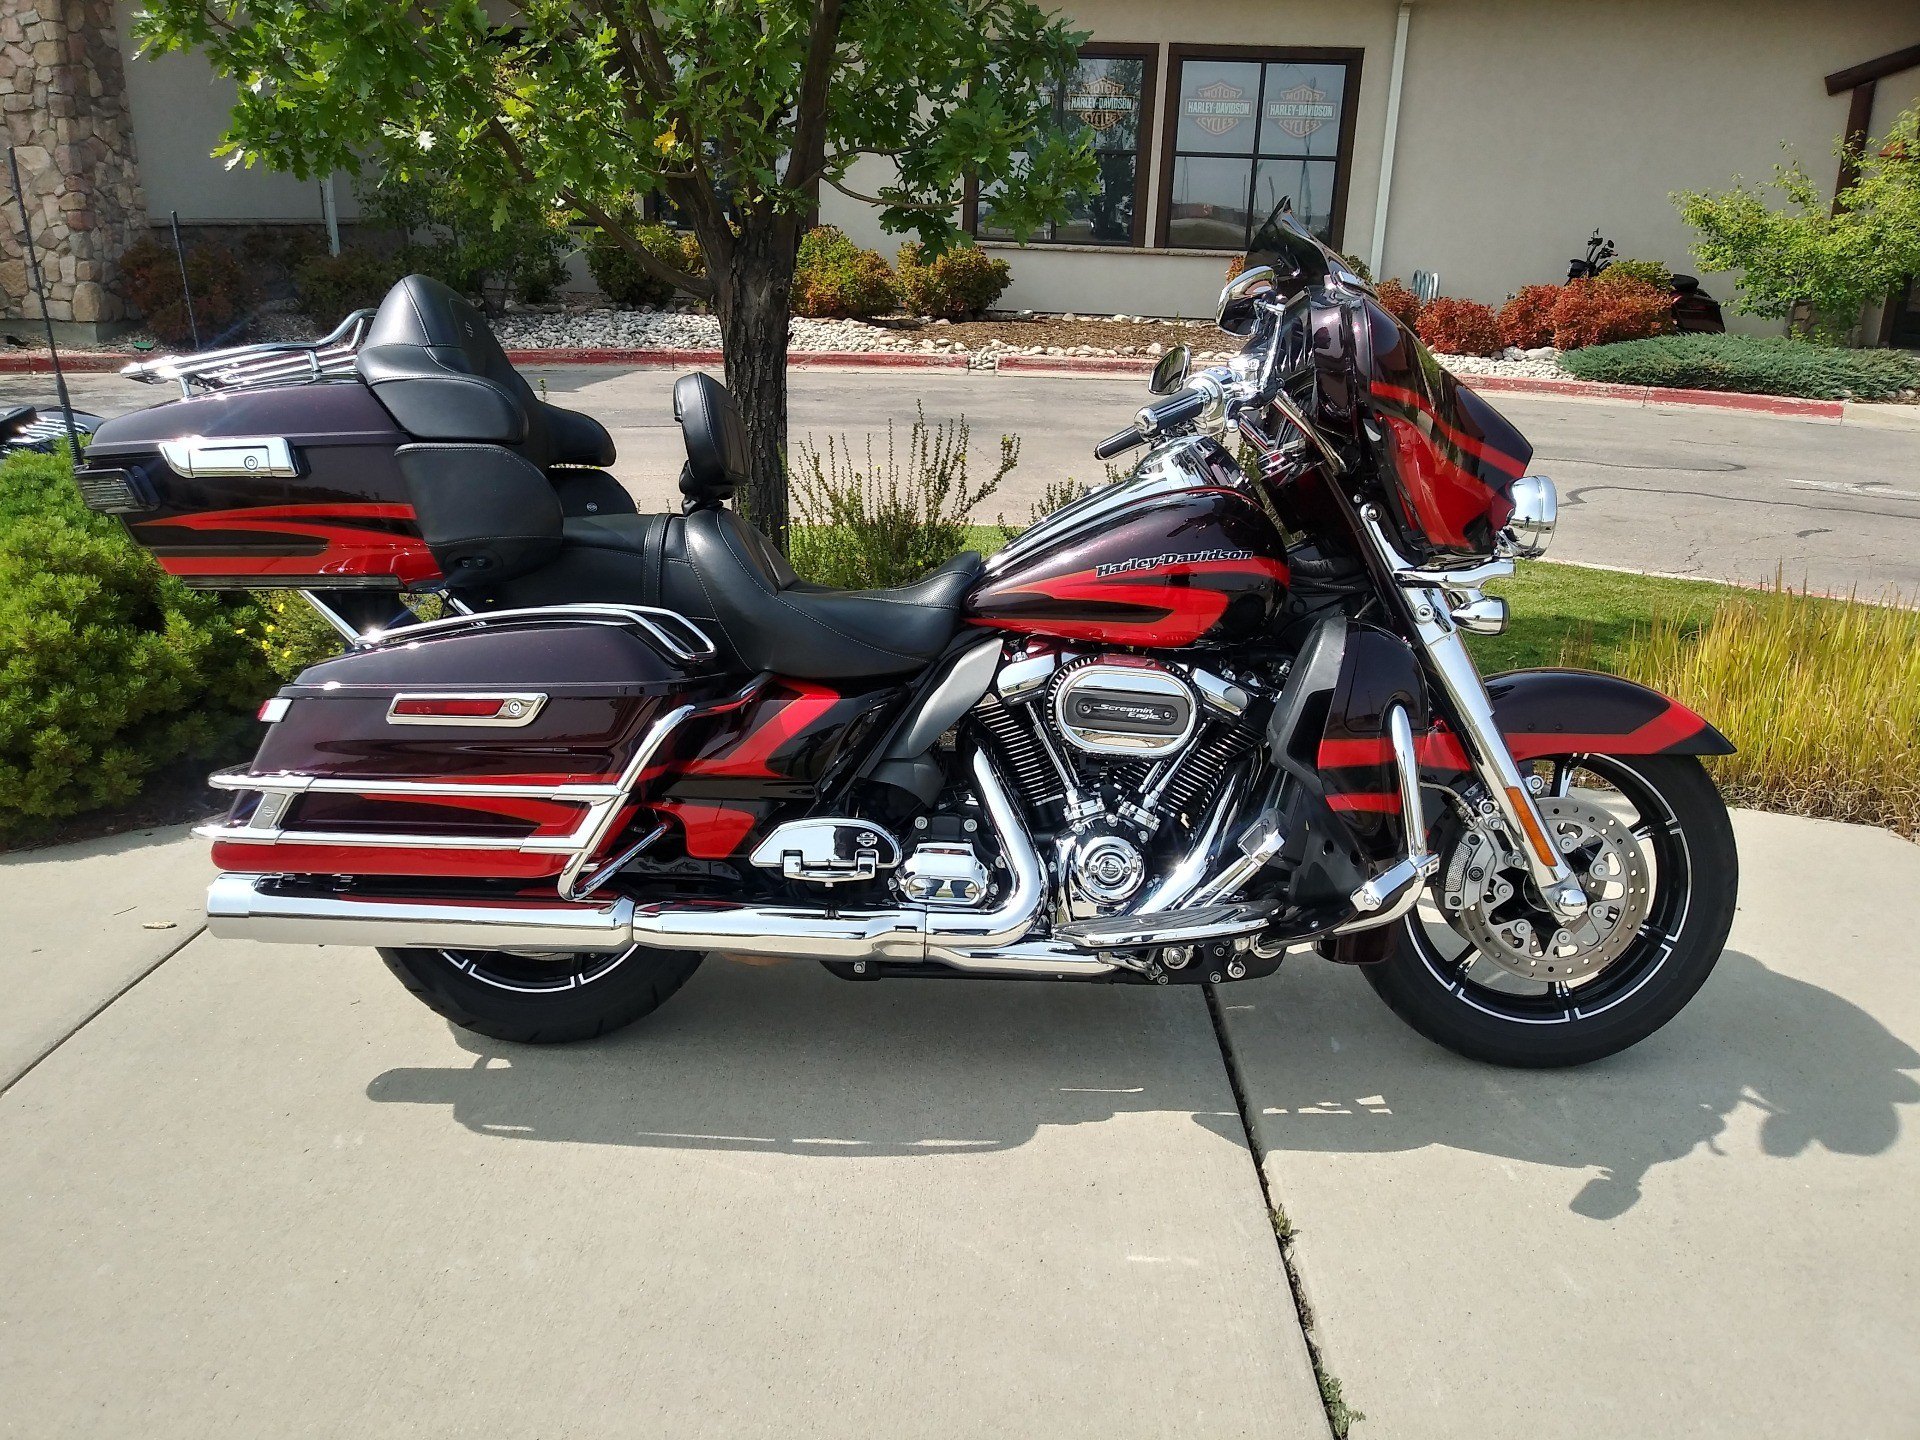 2017 Cvo Limited Promotion Off55